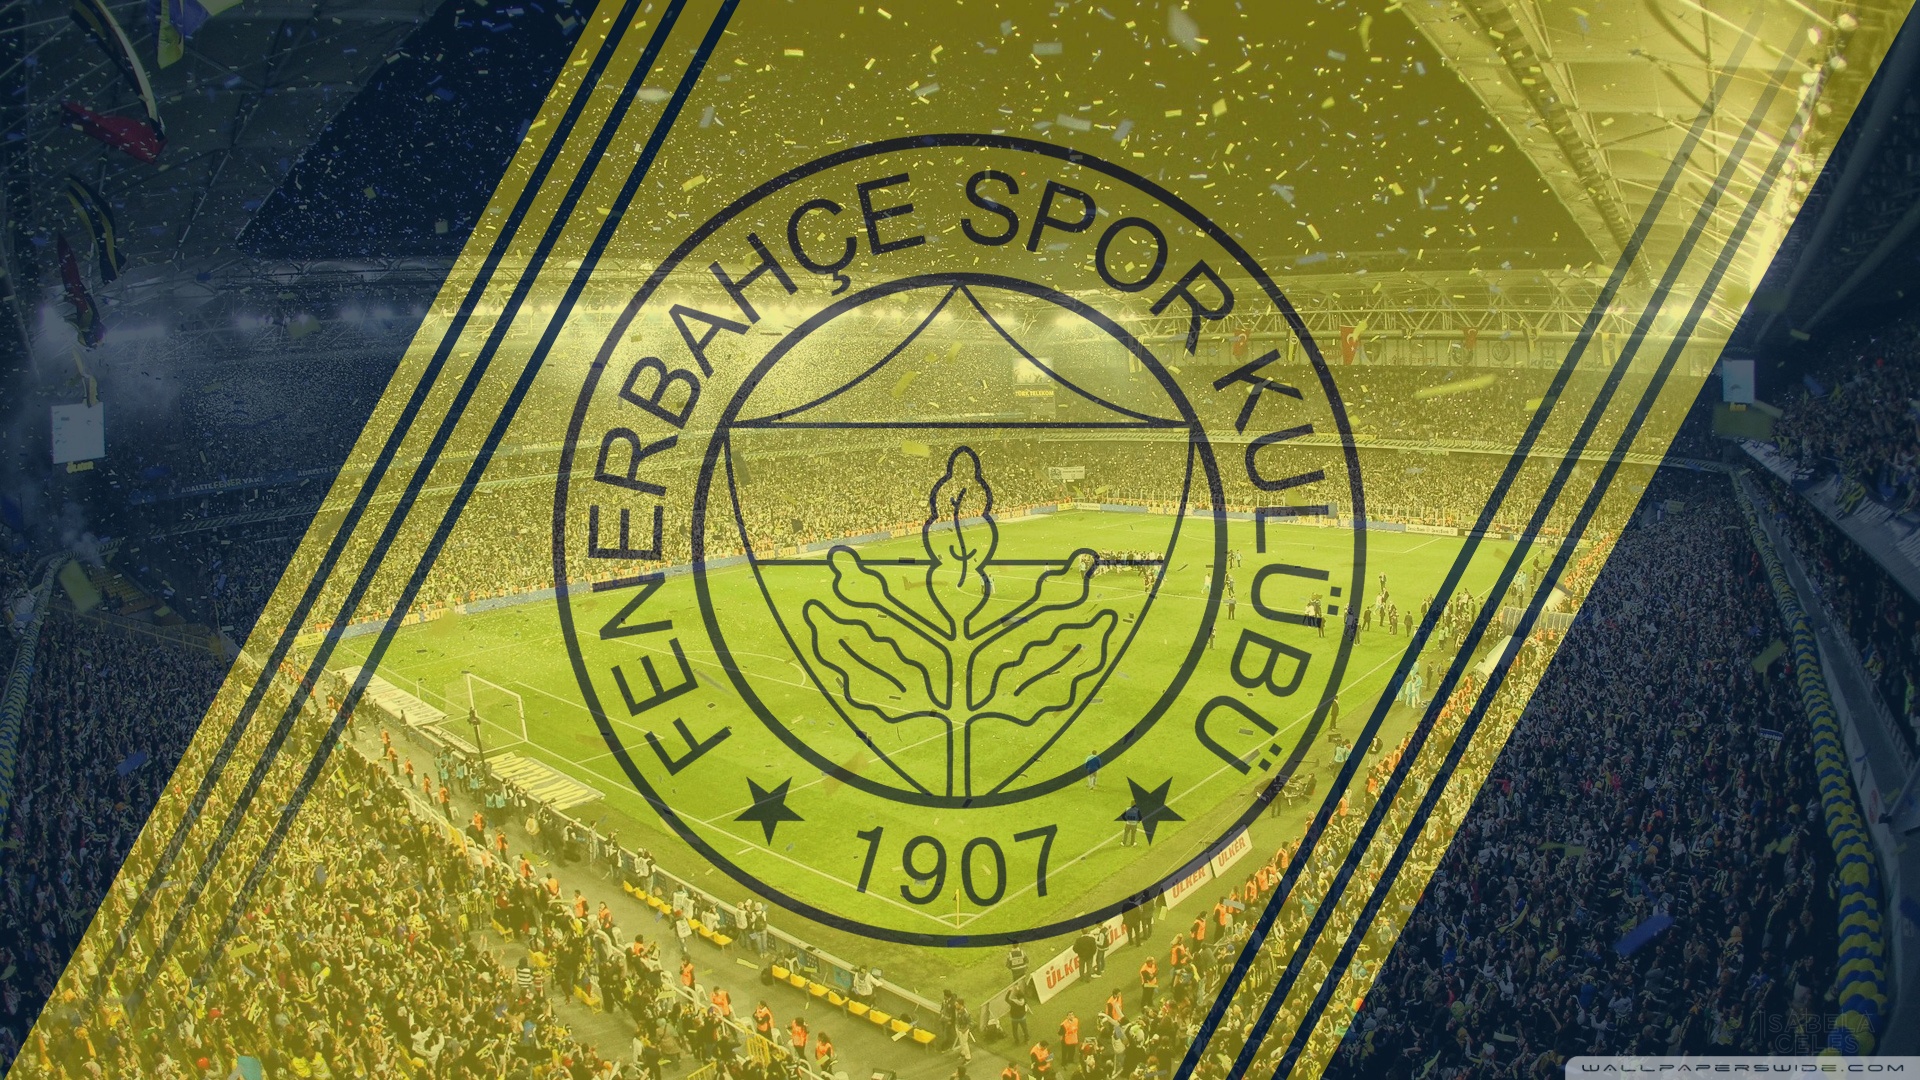 Top fenerbahçe wallpaper 1920x1080 free Download Book Source for free download HD, 4K & high quality wallpaper